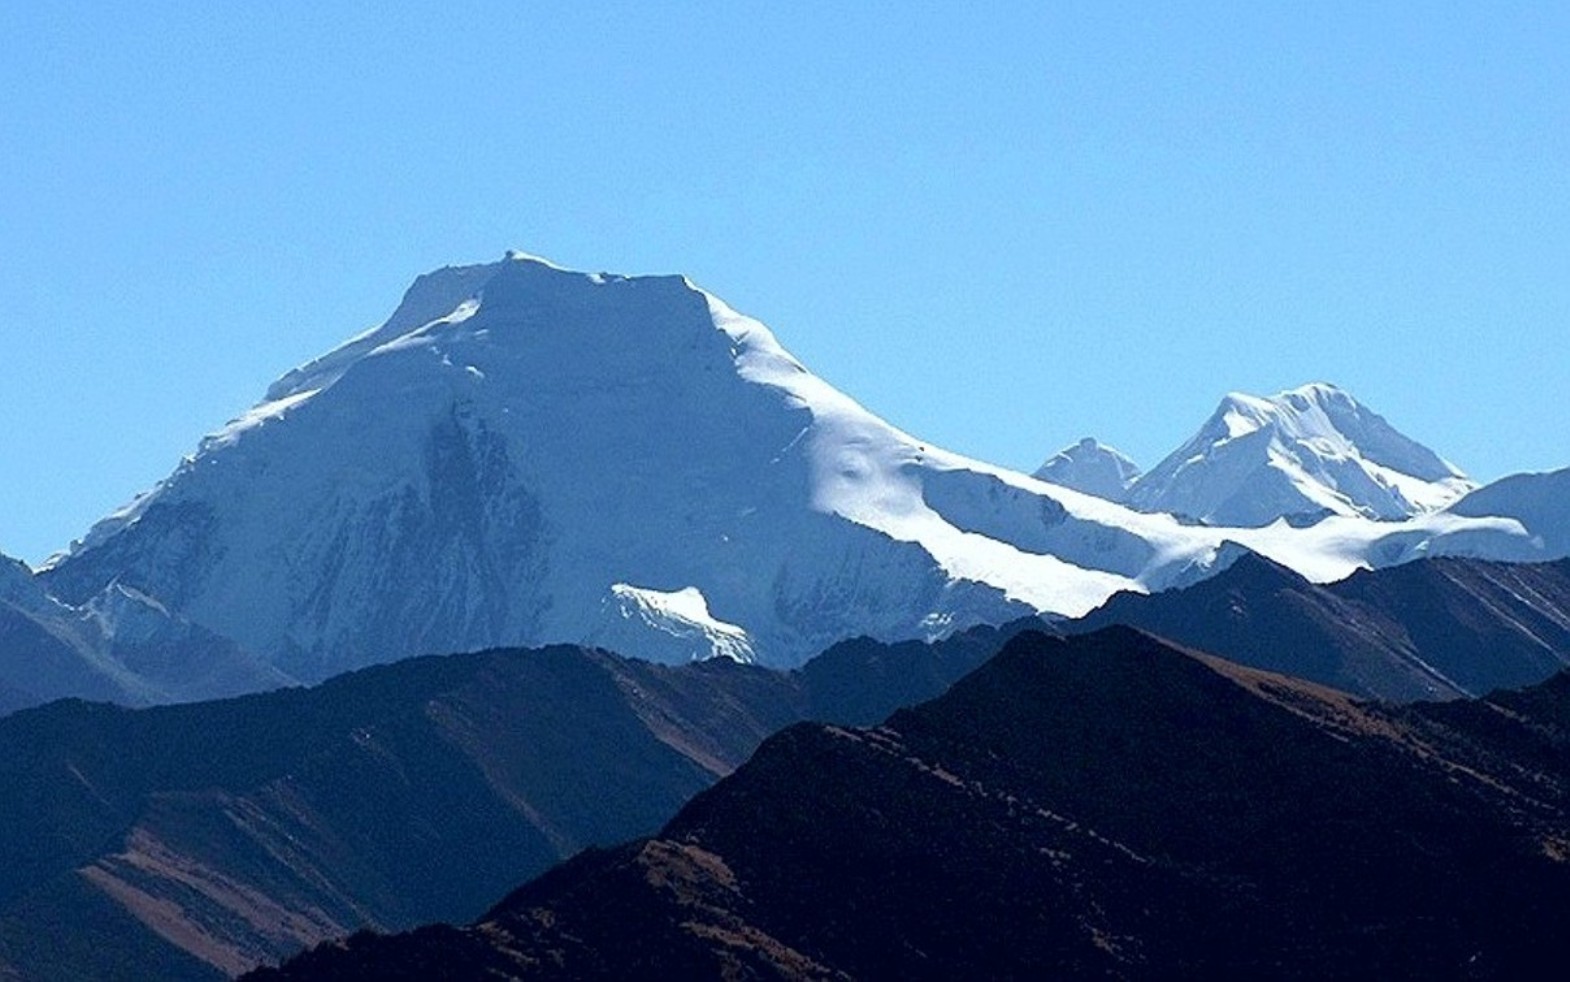 The northwest face of Chipula (6152m) is on the left, and in the background to the right are a 6121-meter and a 6215-meter peak. [Photo] Tom Nakamura